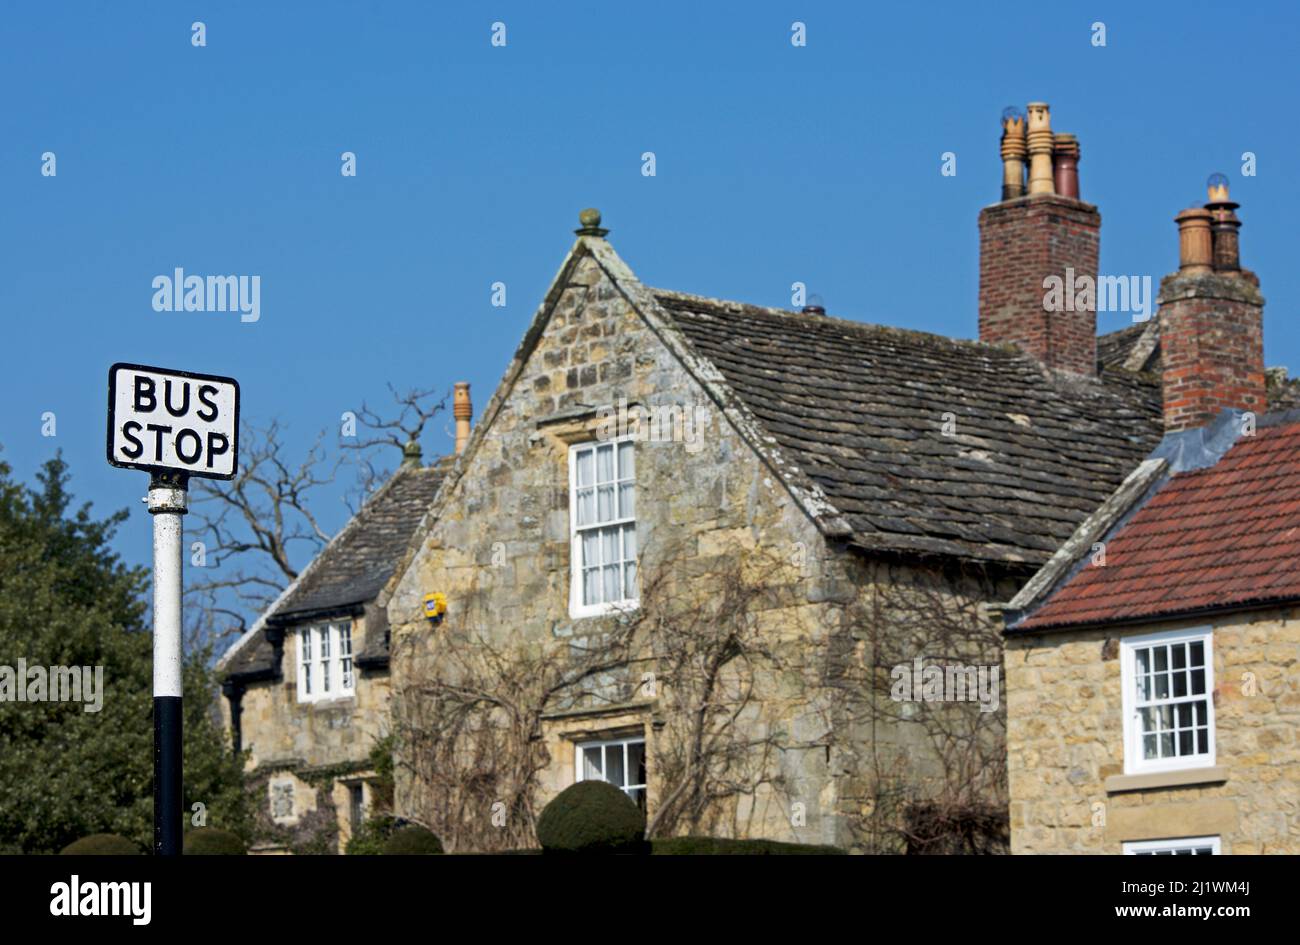 Bus stop in the village of Coxwold, in Hambleton district, North Yorkshire, England UK Stock Photo